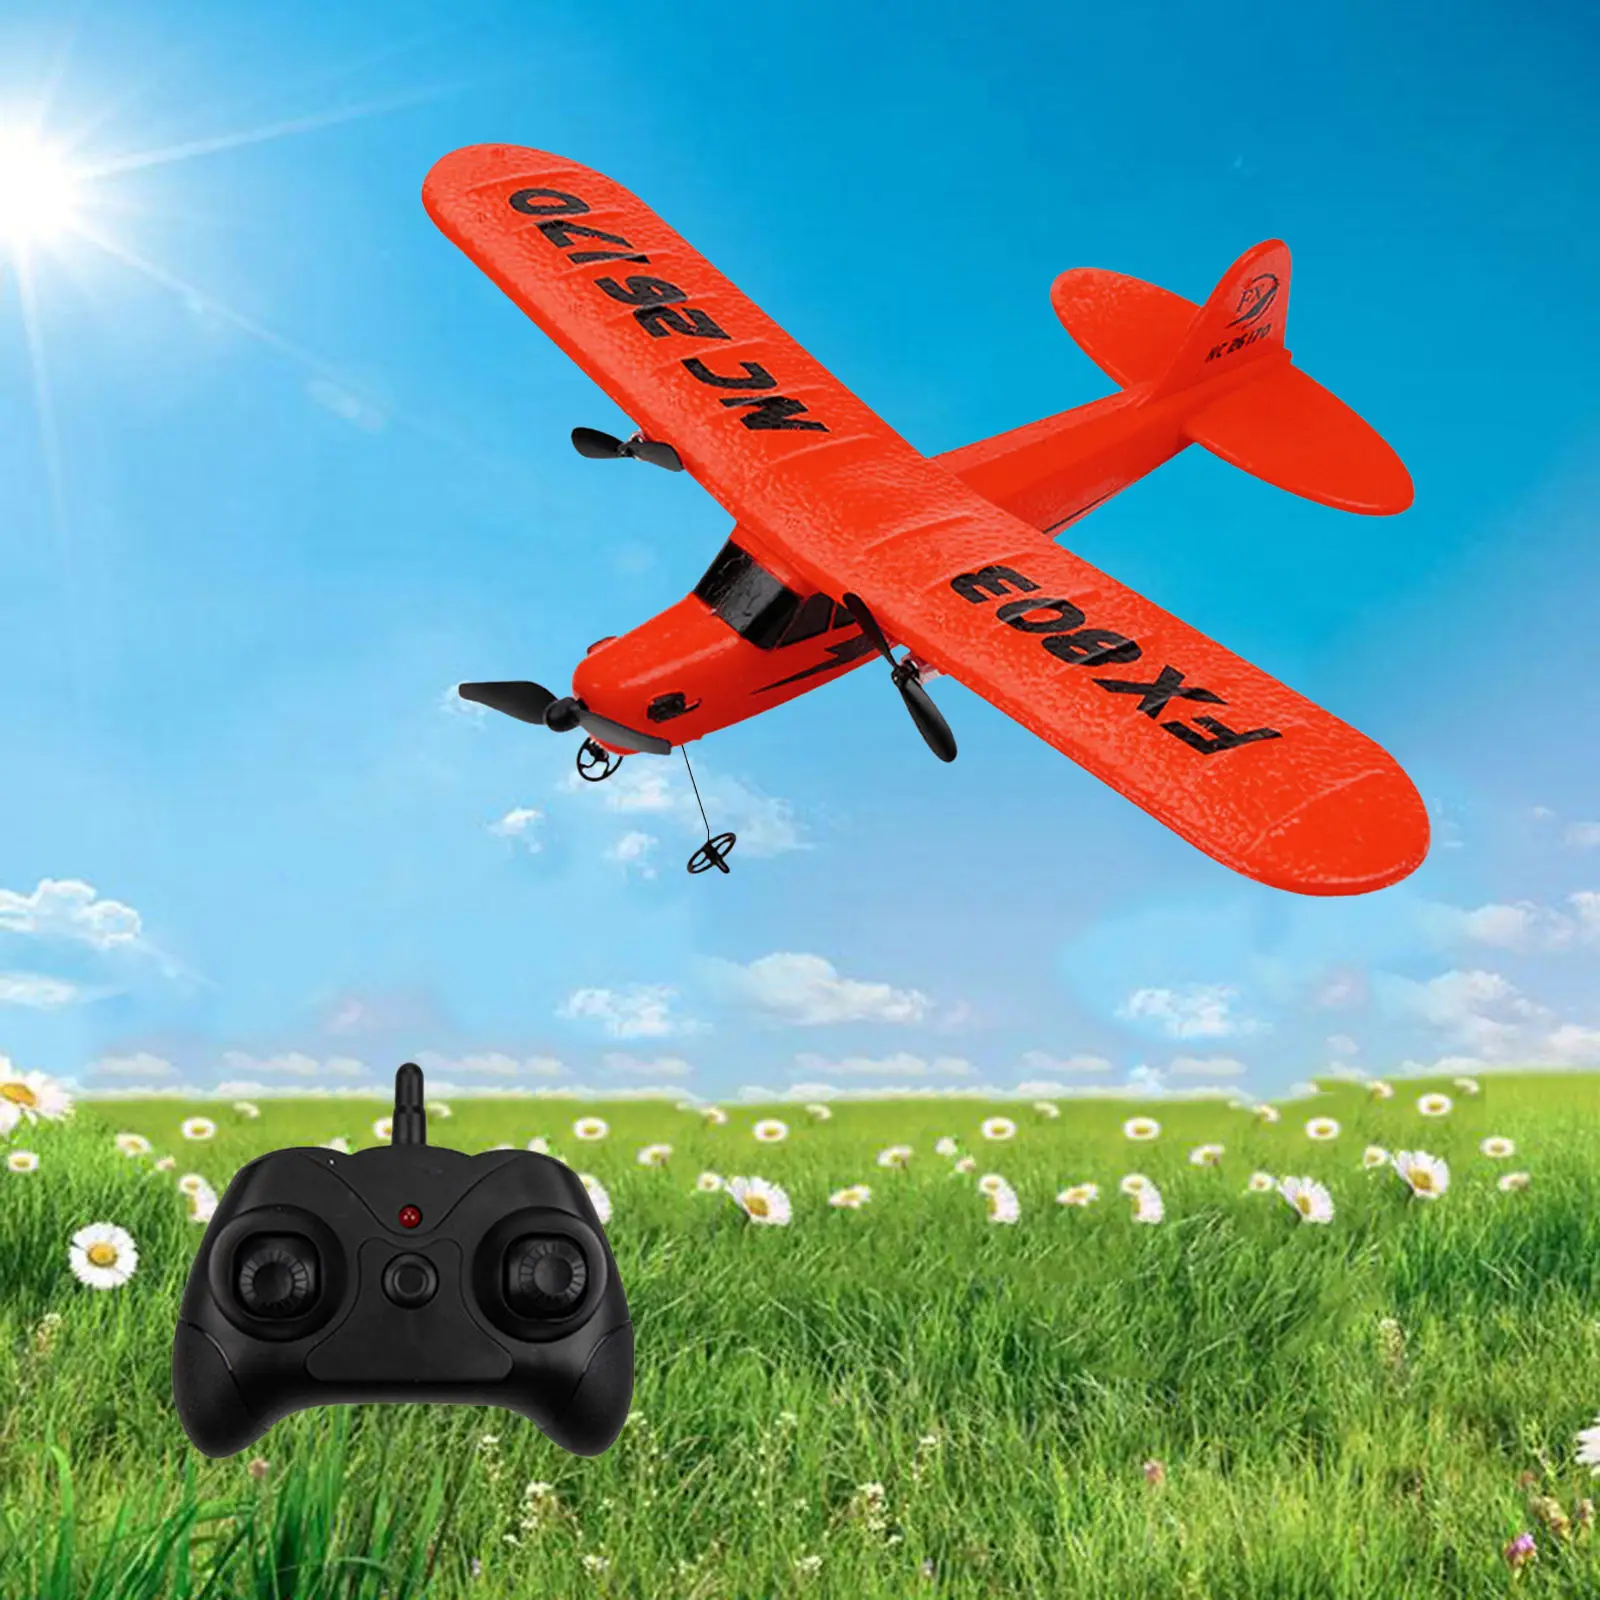 RC Plane, 2.4G Remote Control Airplane Foam Hand RC Aircraft Glider, DIY Kit Toys for Kids Beginners